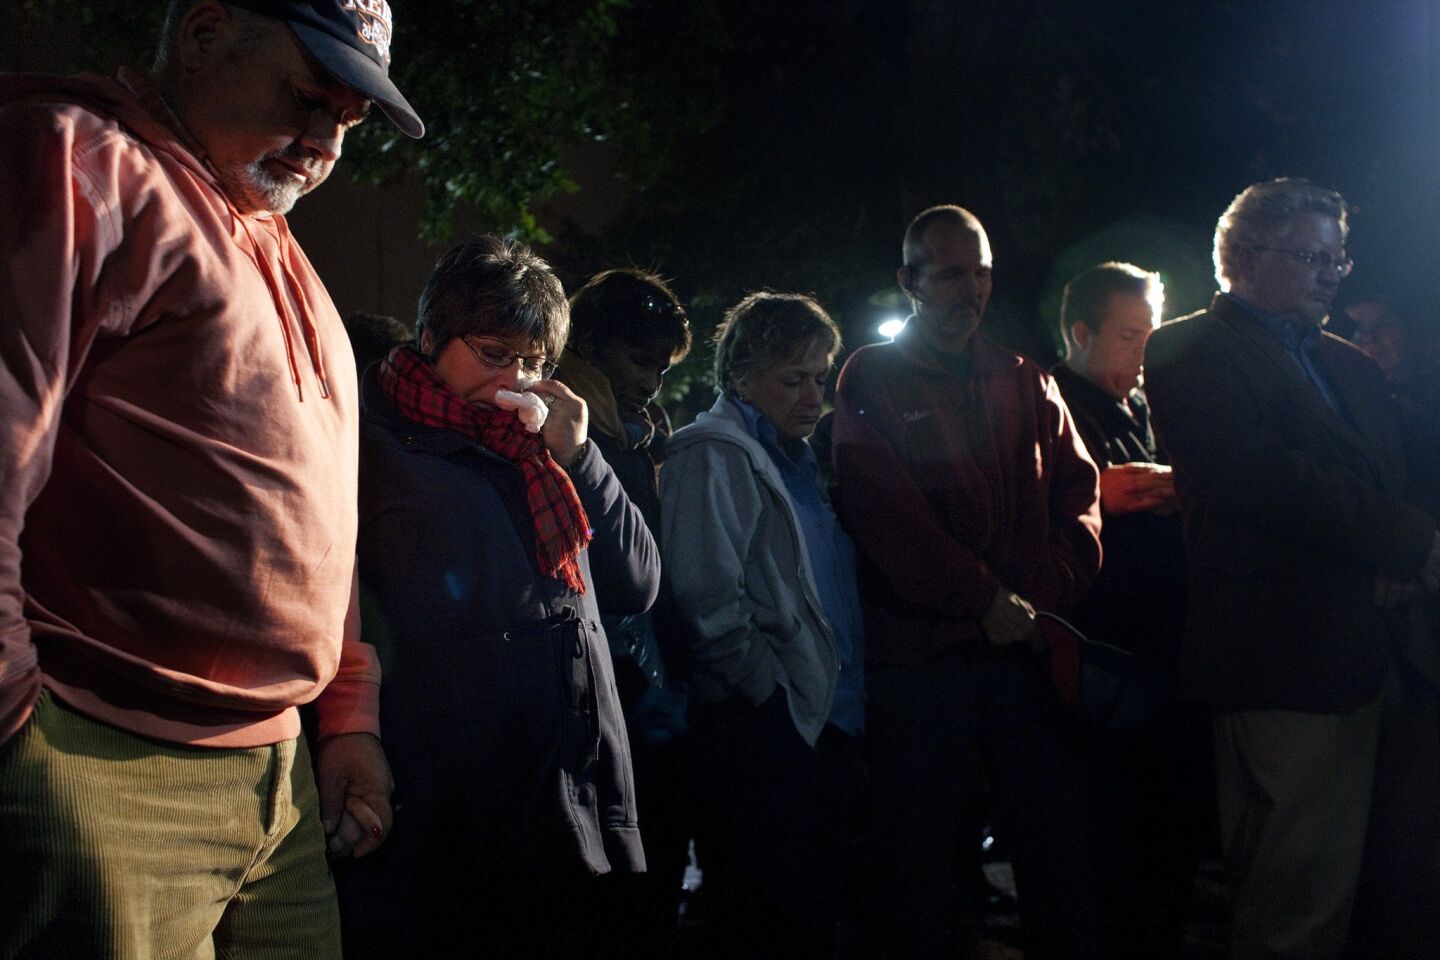 Riverside residents shed tears and pray during a vigil for the slain and wounded Riverside police officers.